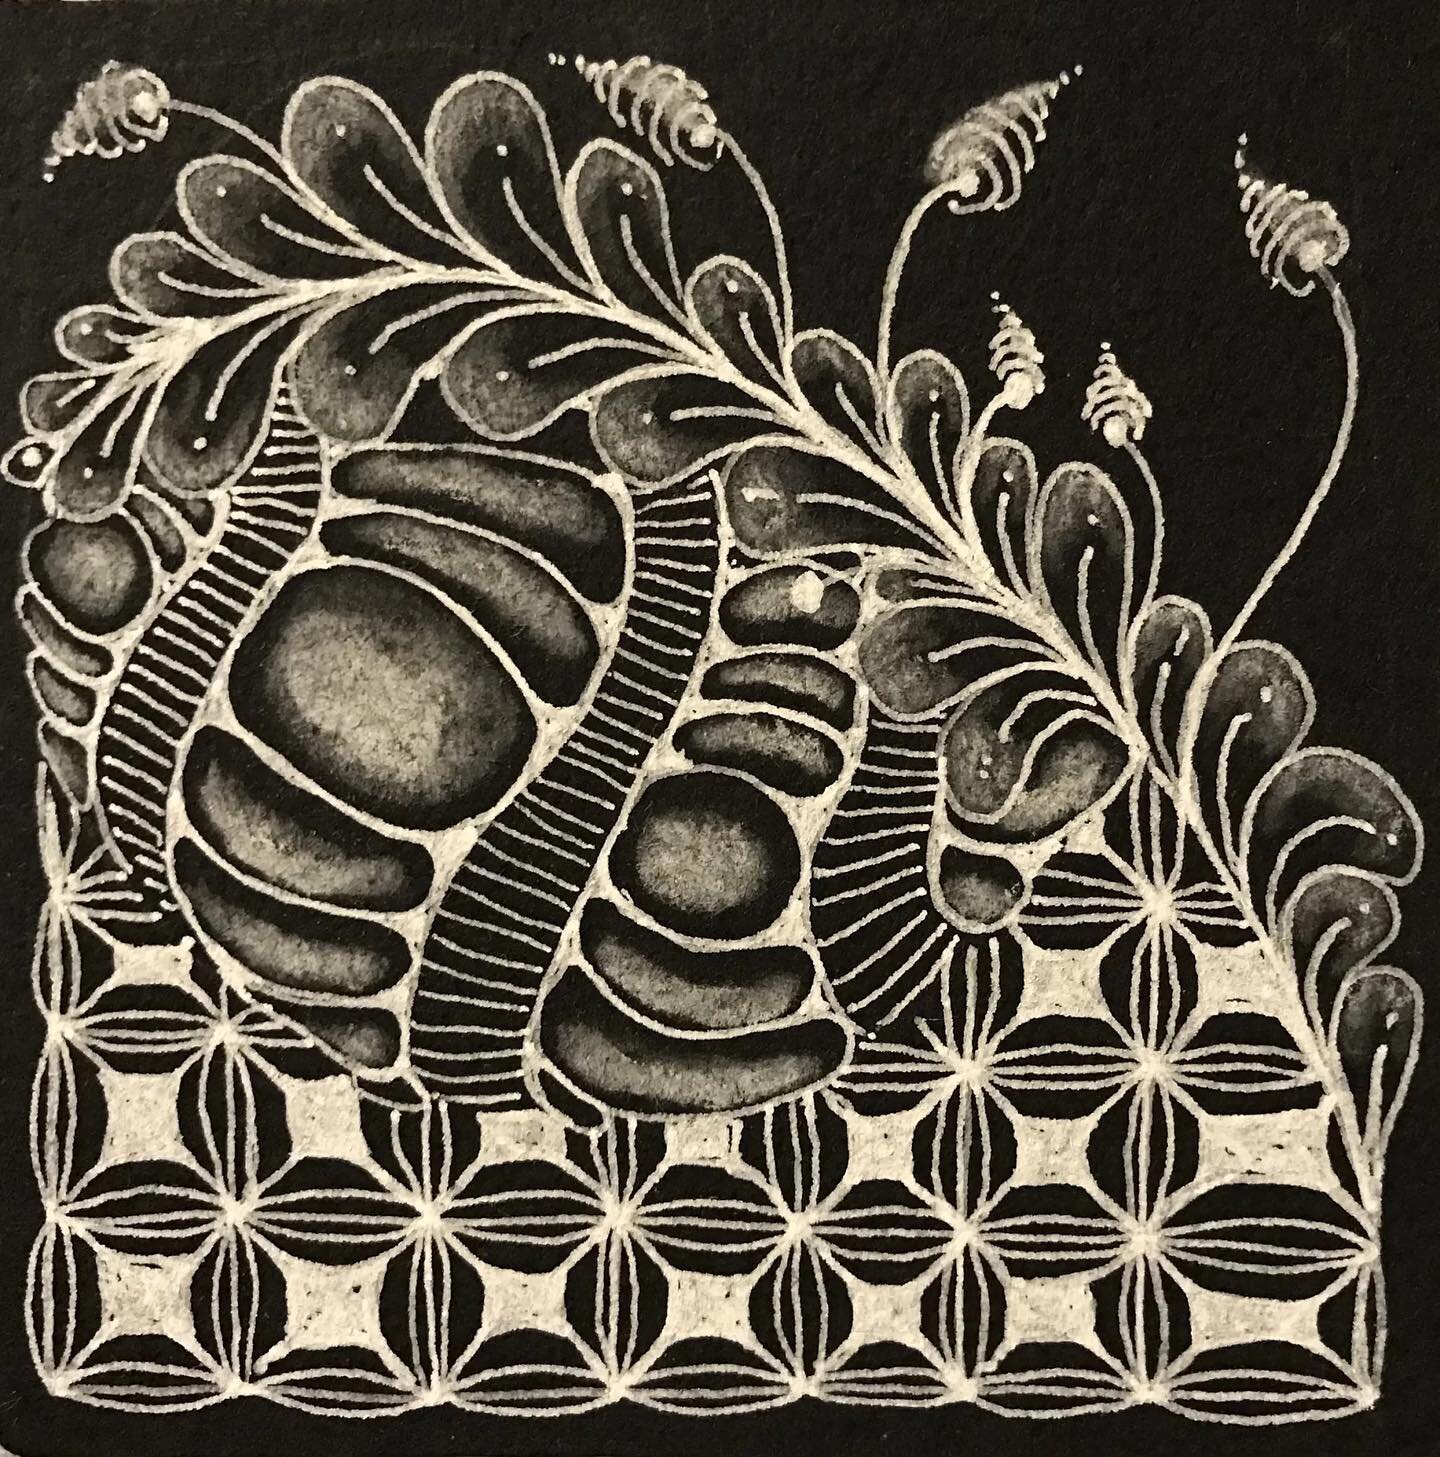 Sara and her Zen Valley Tangle are back!
Kicking off a summer series, Tuesday Night Tangles (TNT), with an instructive class using white pens on black tiles.
If interested to join, please see her website for details. @zenvalleytangle 
Zenvalleytangle